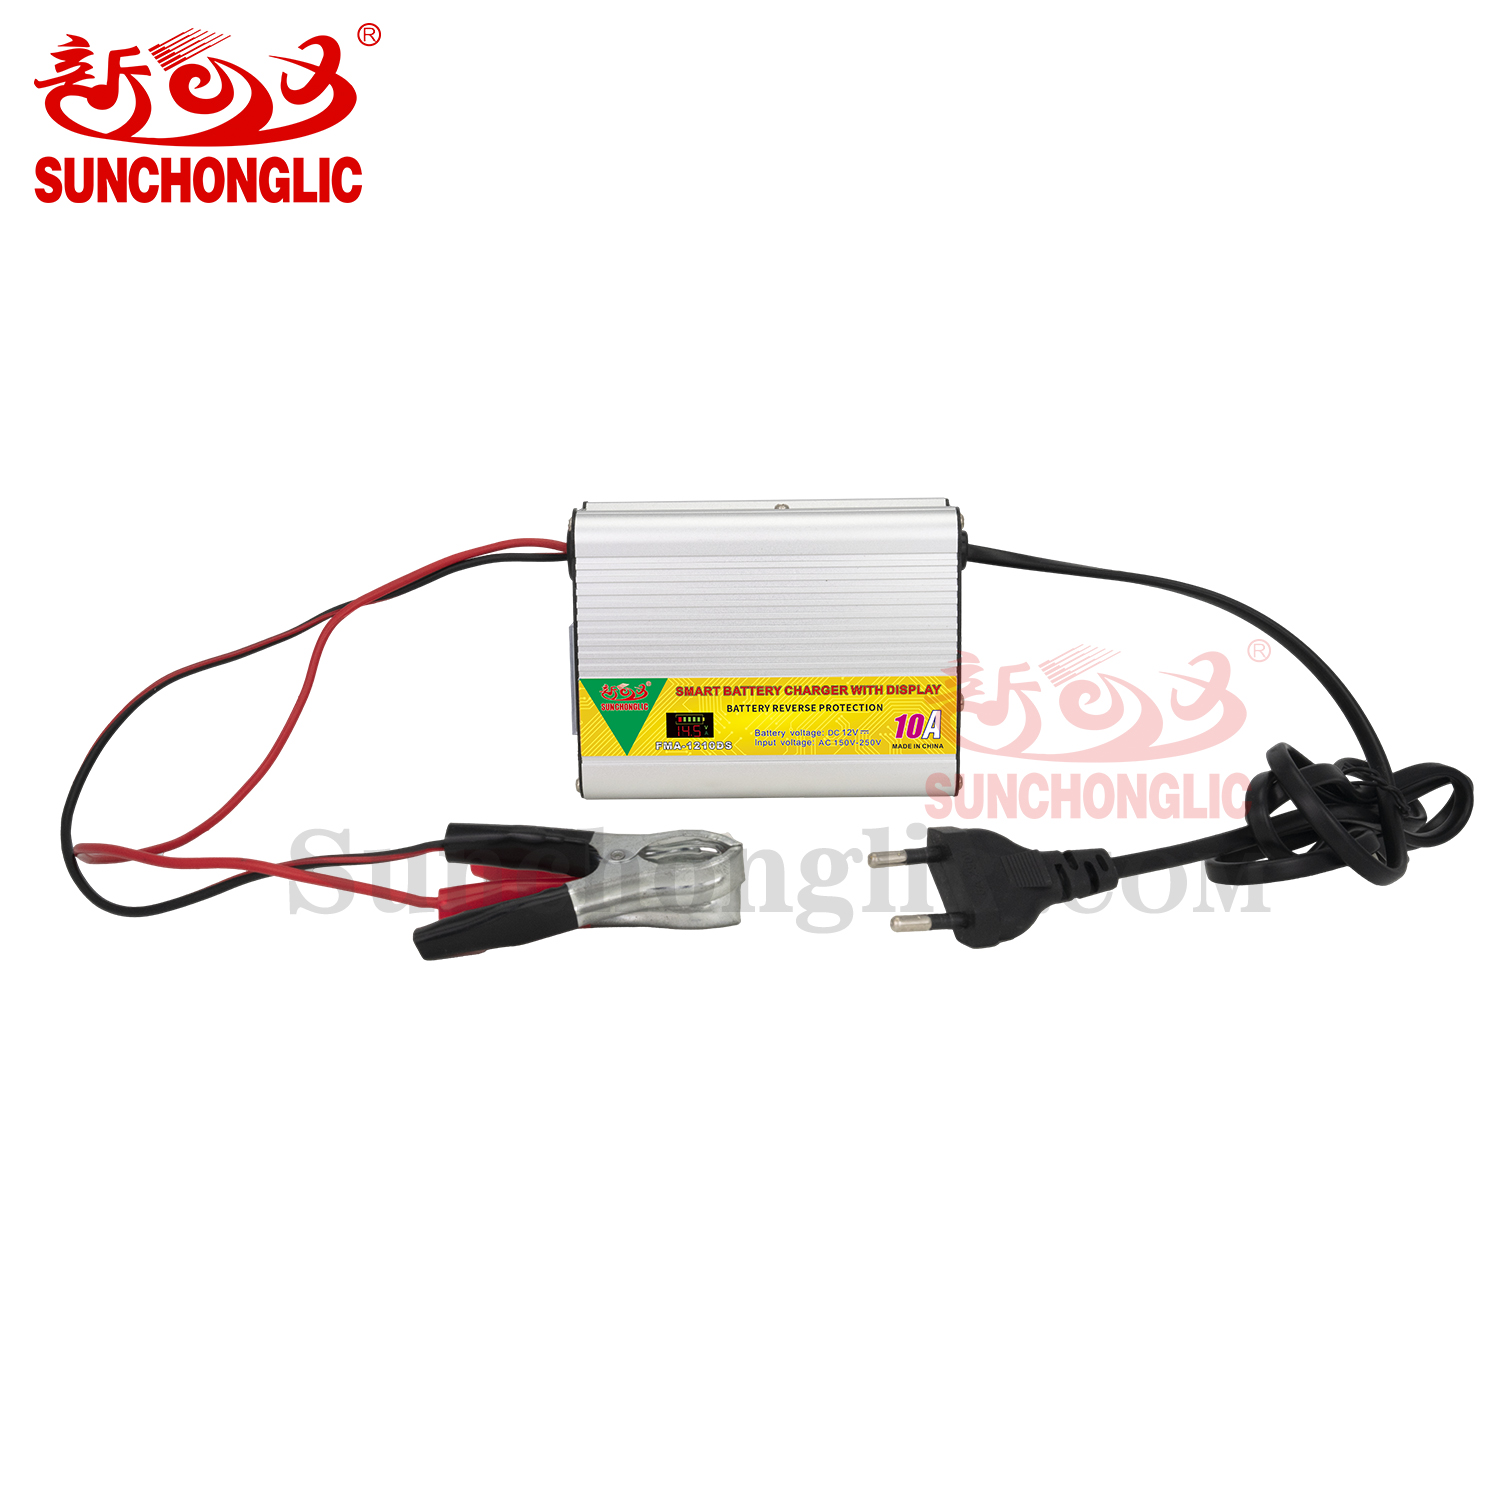 Sunchonglic 12V 10A intelligent battery charger AGM GEL Lead acid battery charger